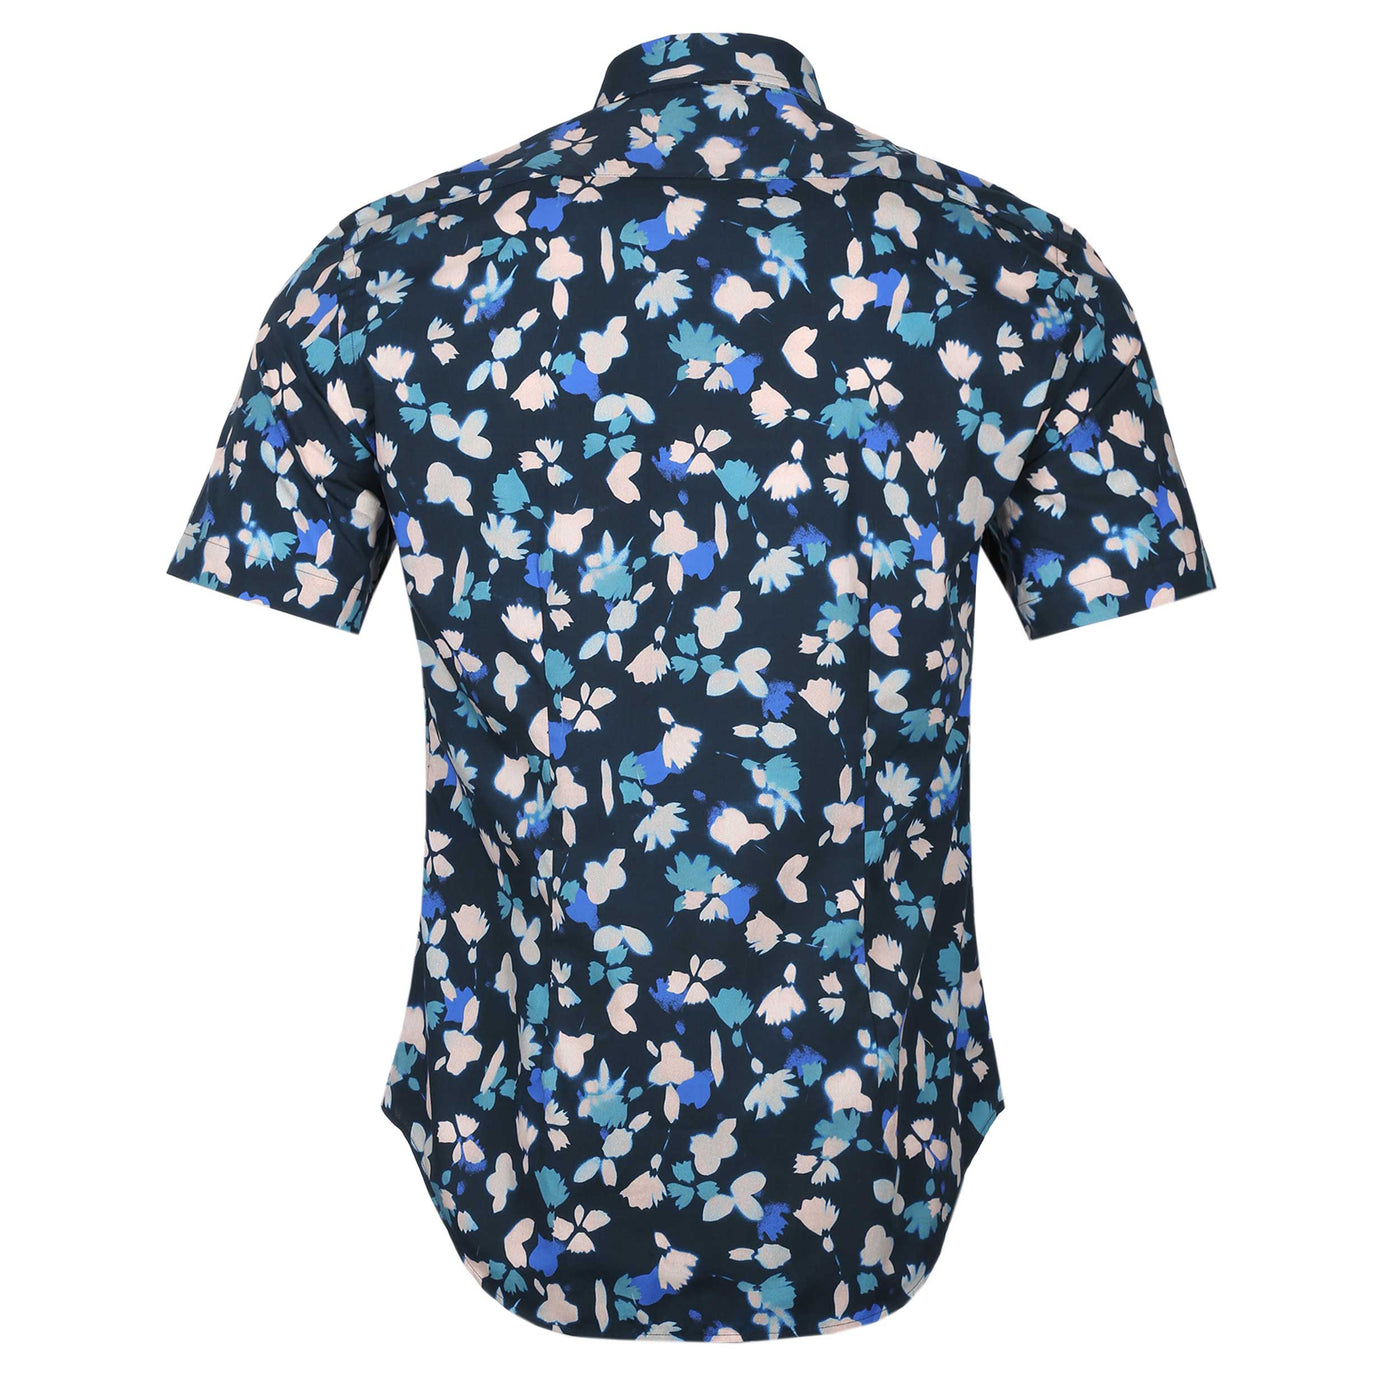 Paul Smith Slim Fit Floral SS Shirt in Navy Back